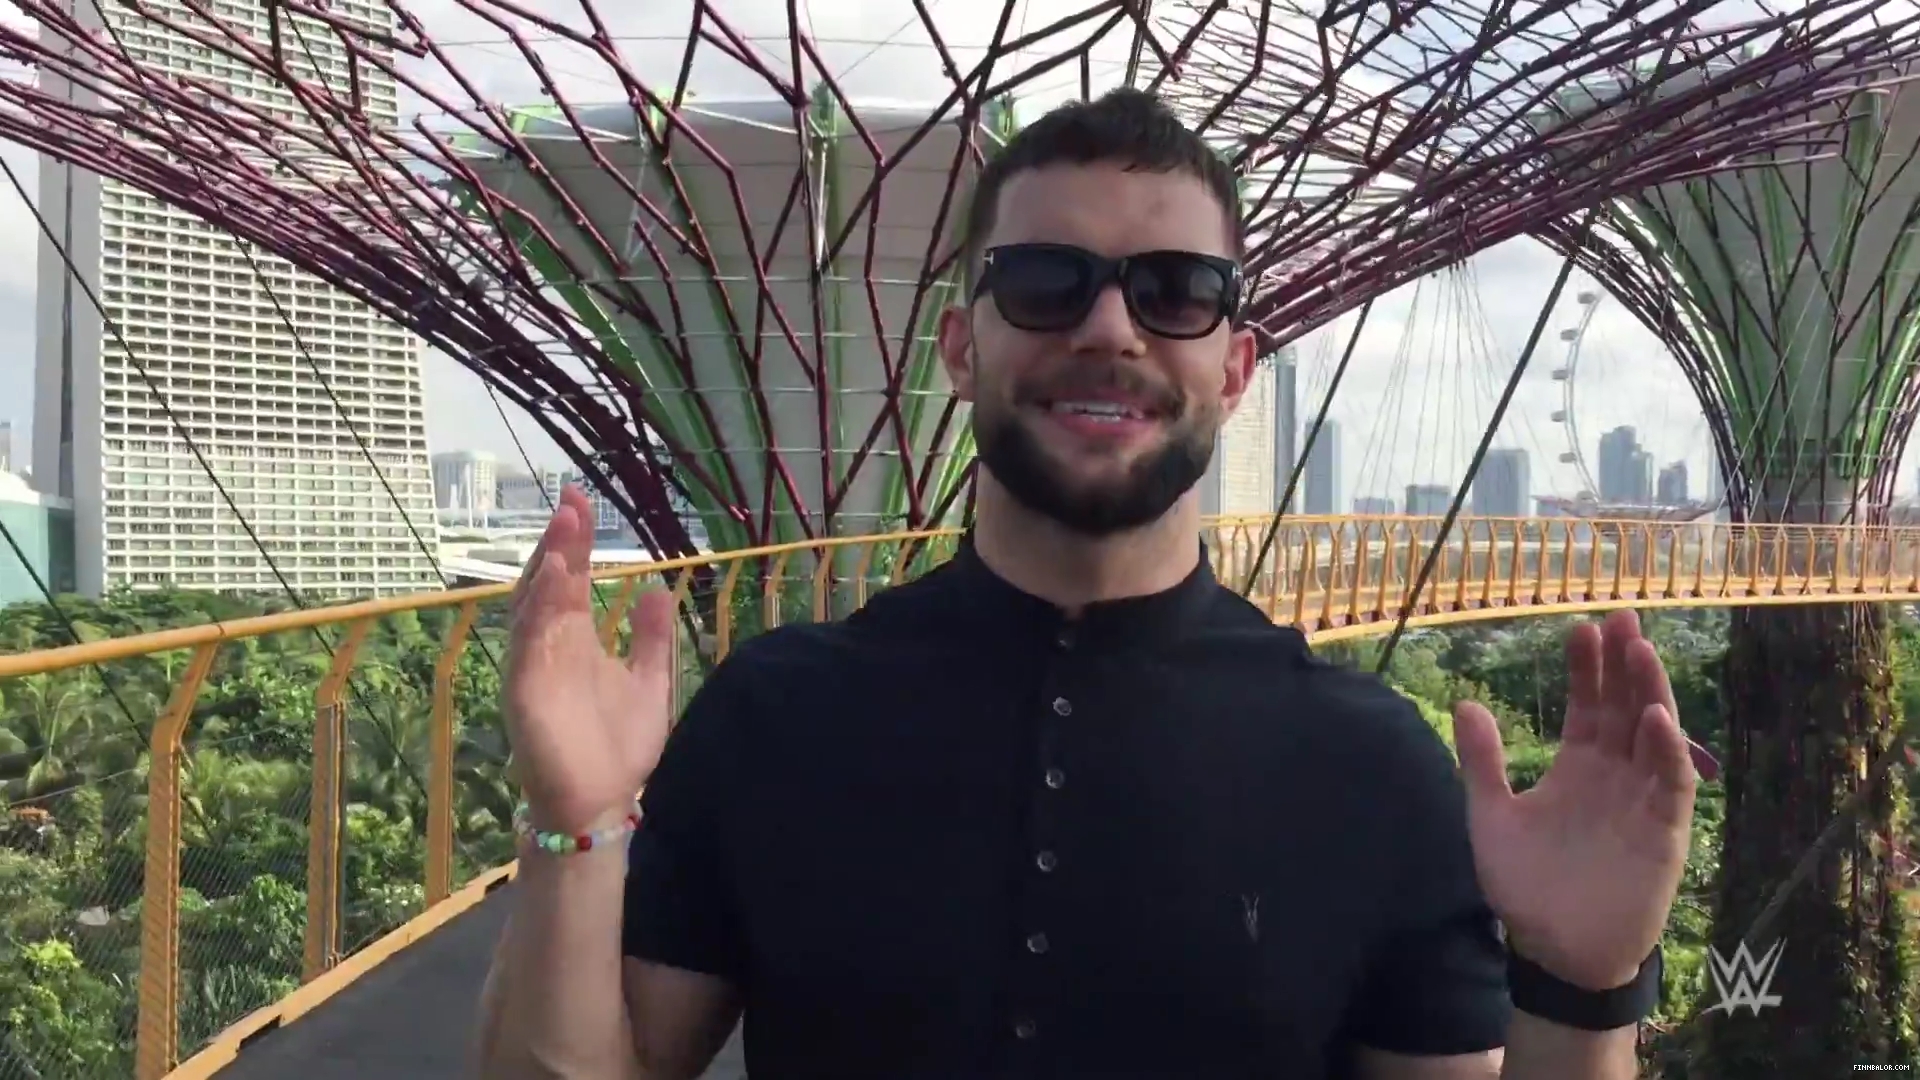 Finn_Balor_feels_like_he_is_in__Star_Wars__while_touring_Singapore_s_Supertree__mp40015.jpg